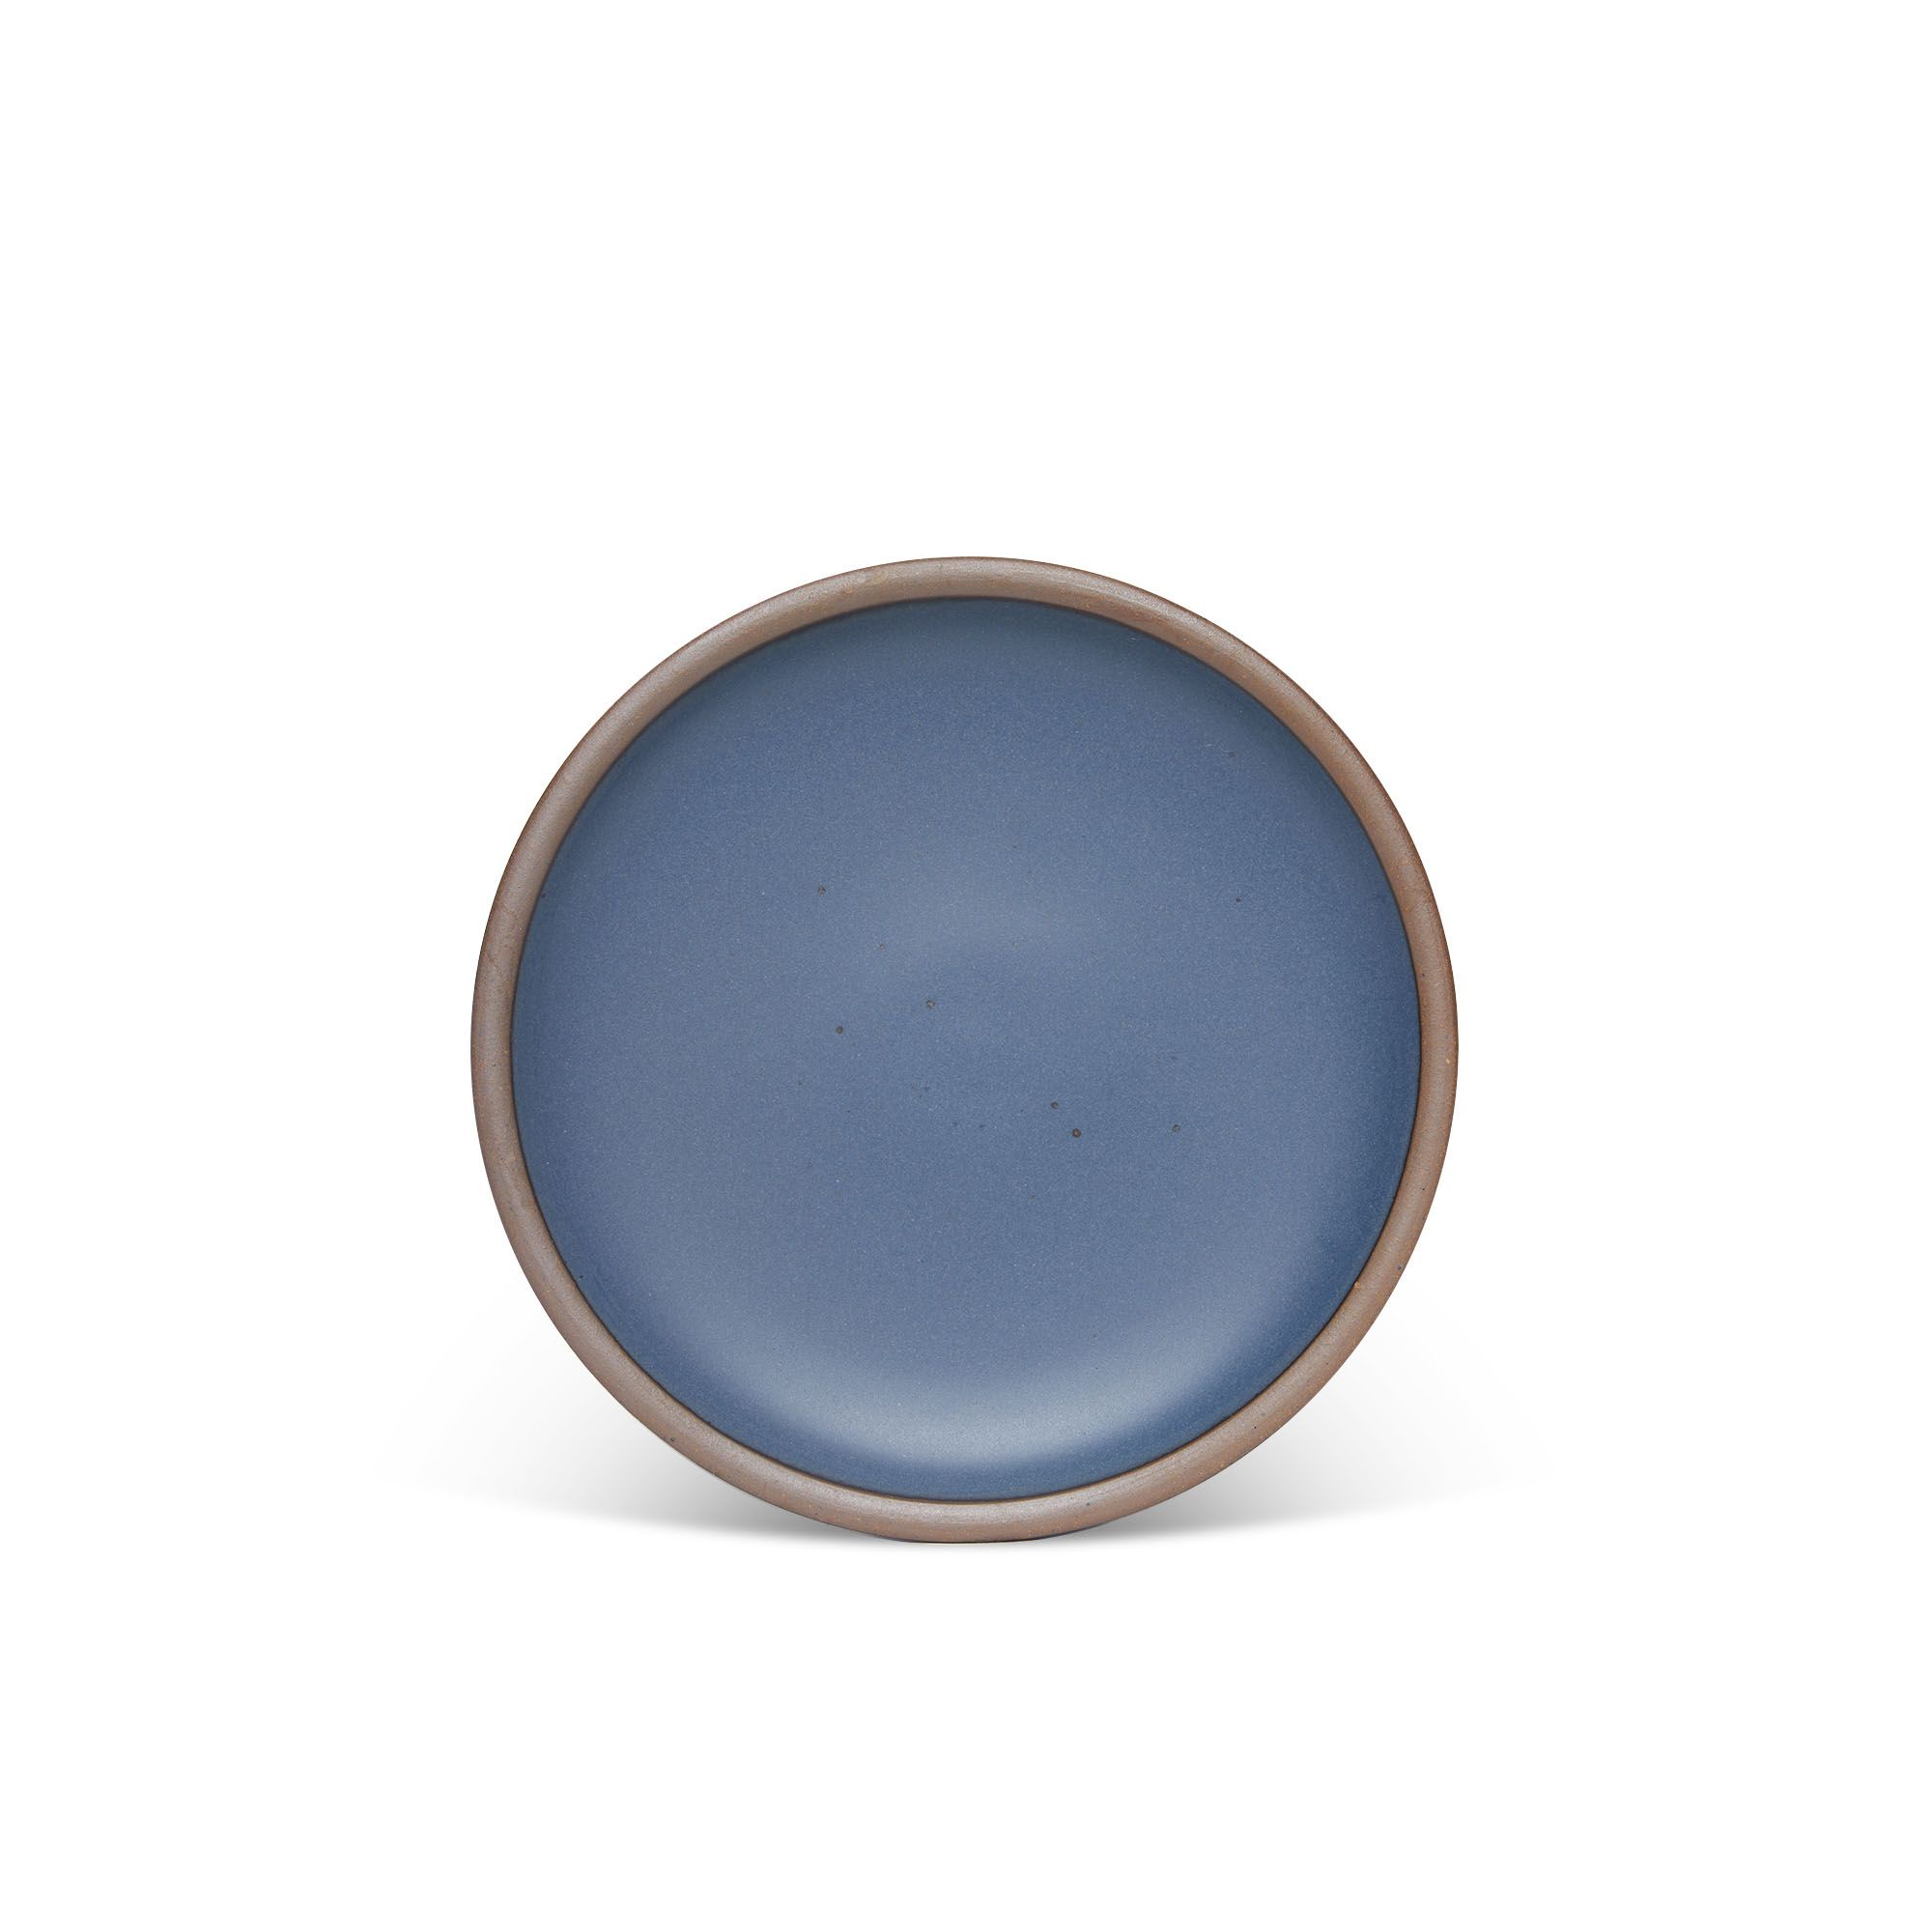 A medium sized ceramic plate in a toned-down navy color featuring iron speckles and an unglazed rim.